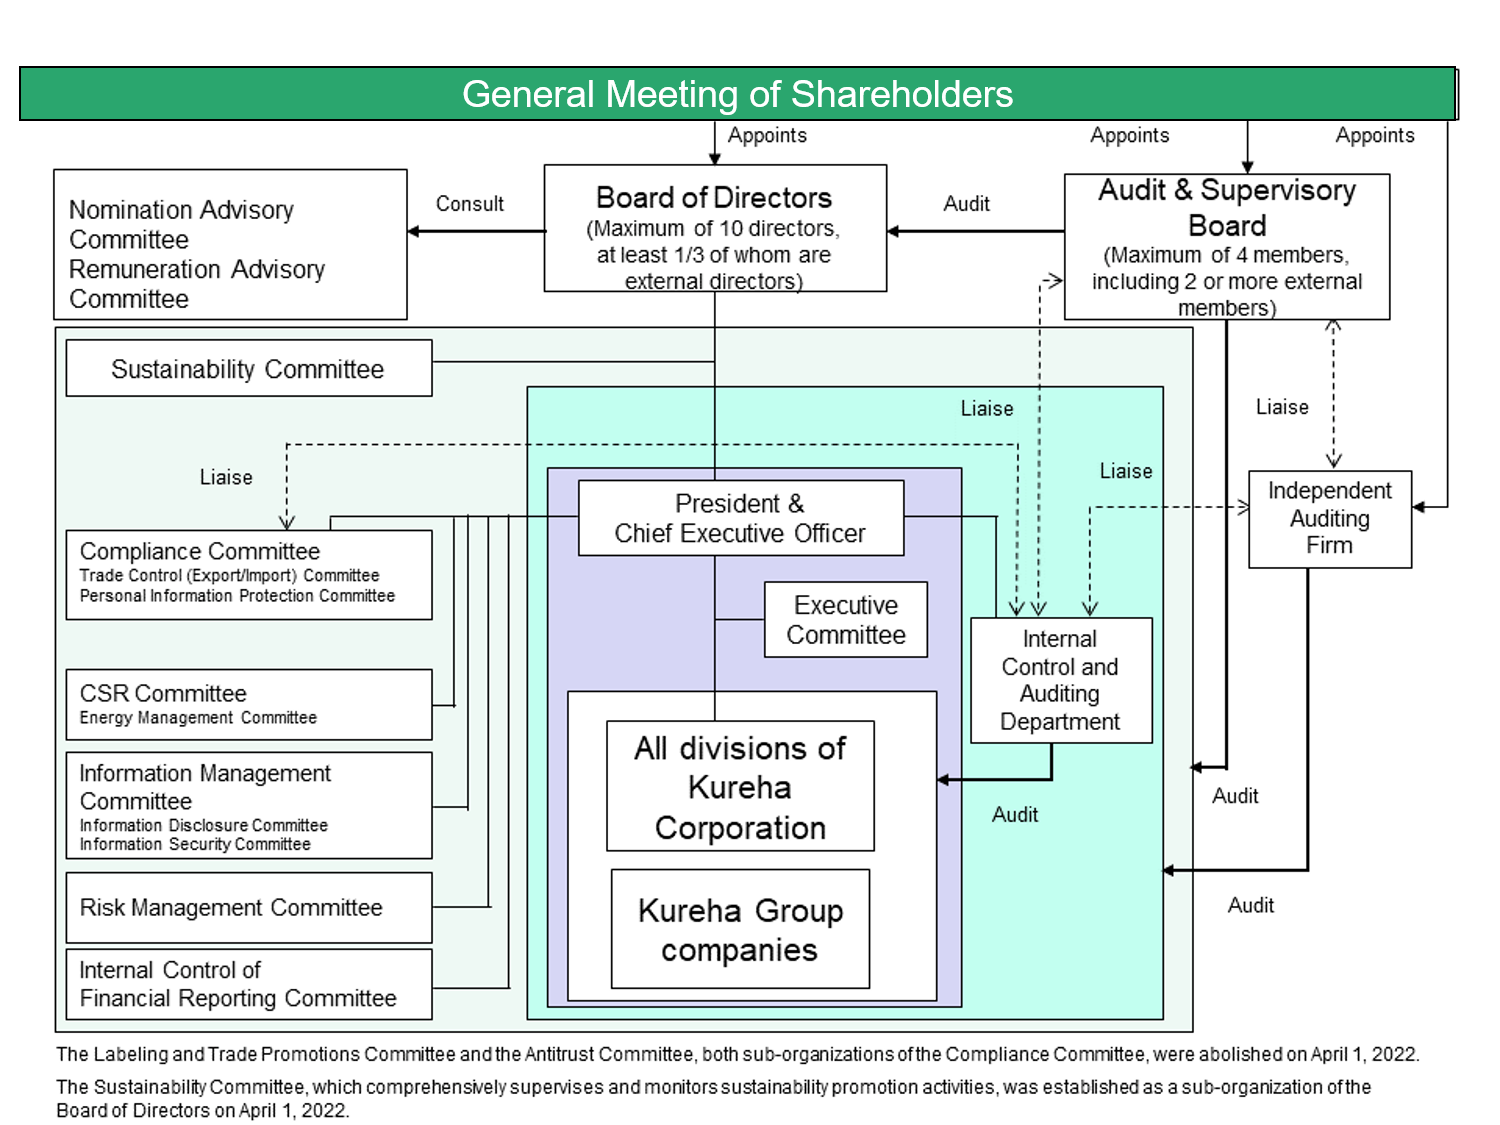 Diagram of Internal Control Systems (As of April 2-22)